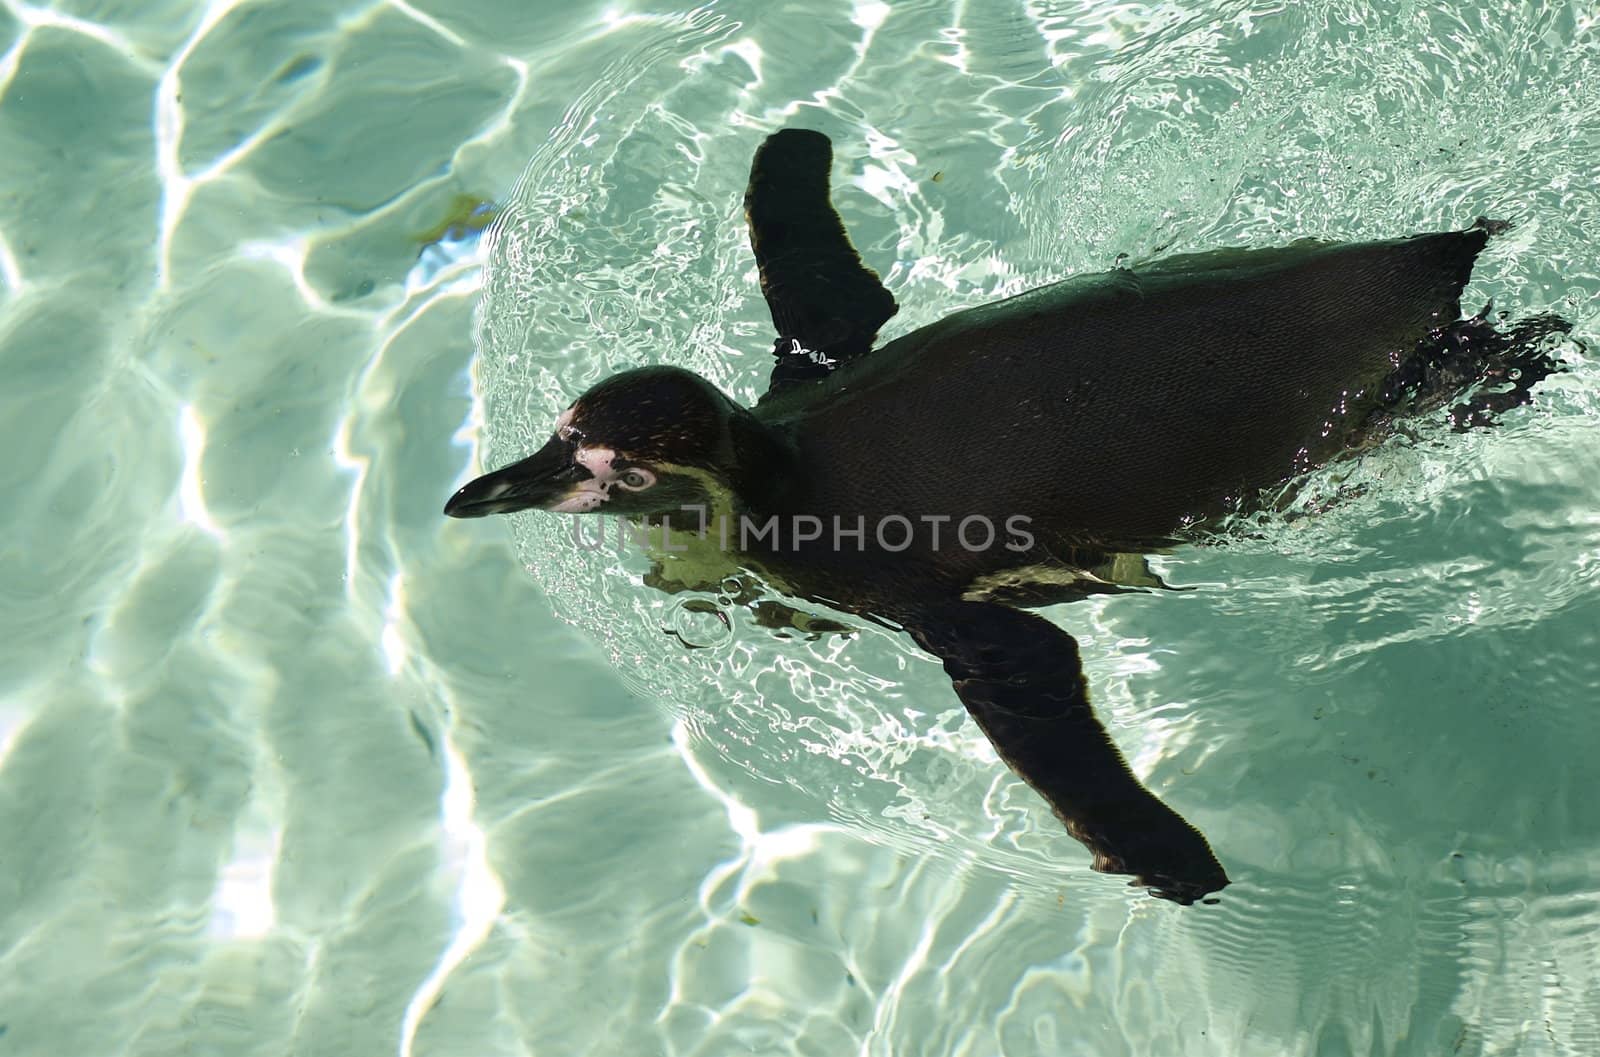 Swimming Penguin by PrincessToula